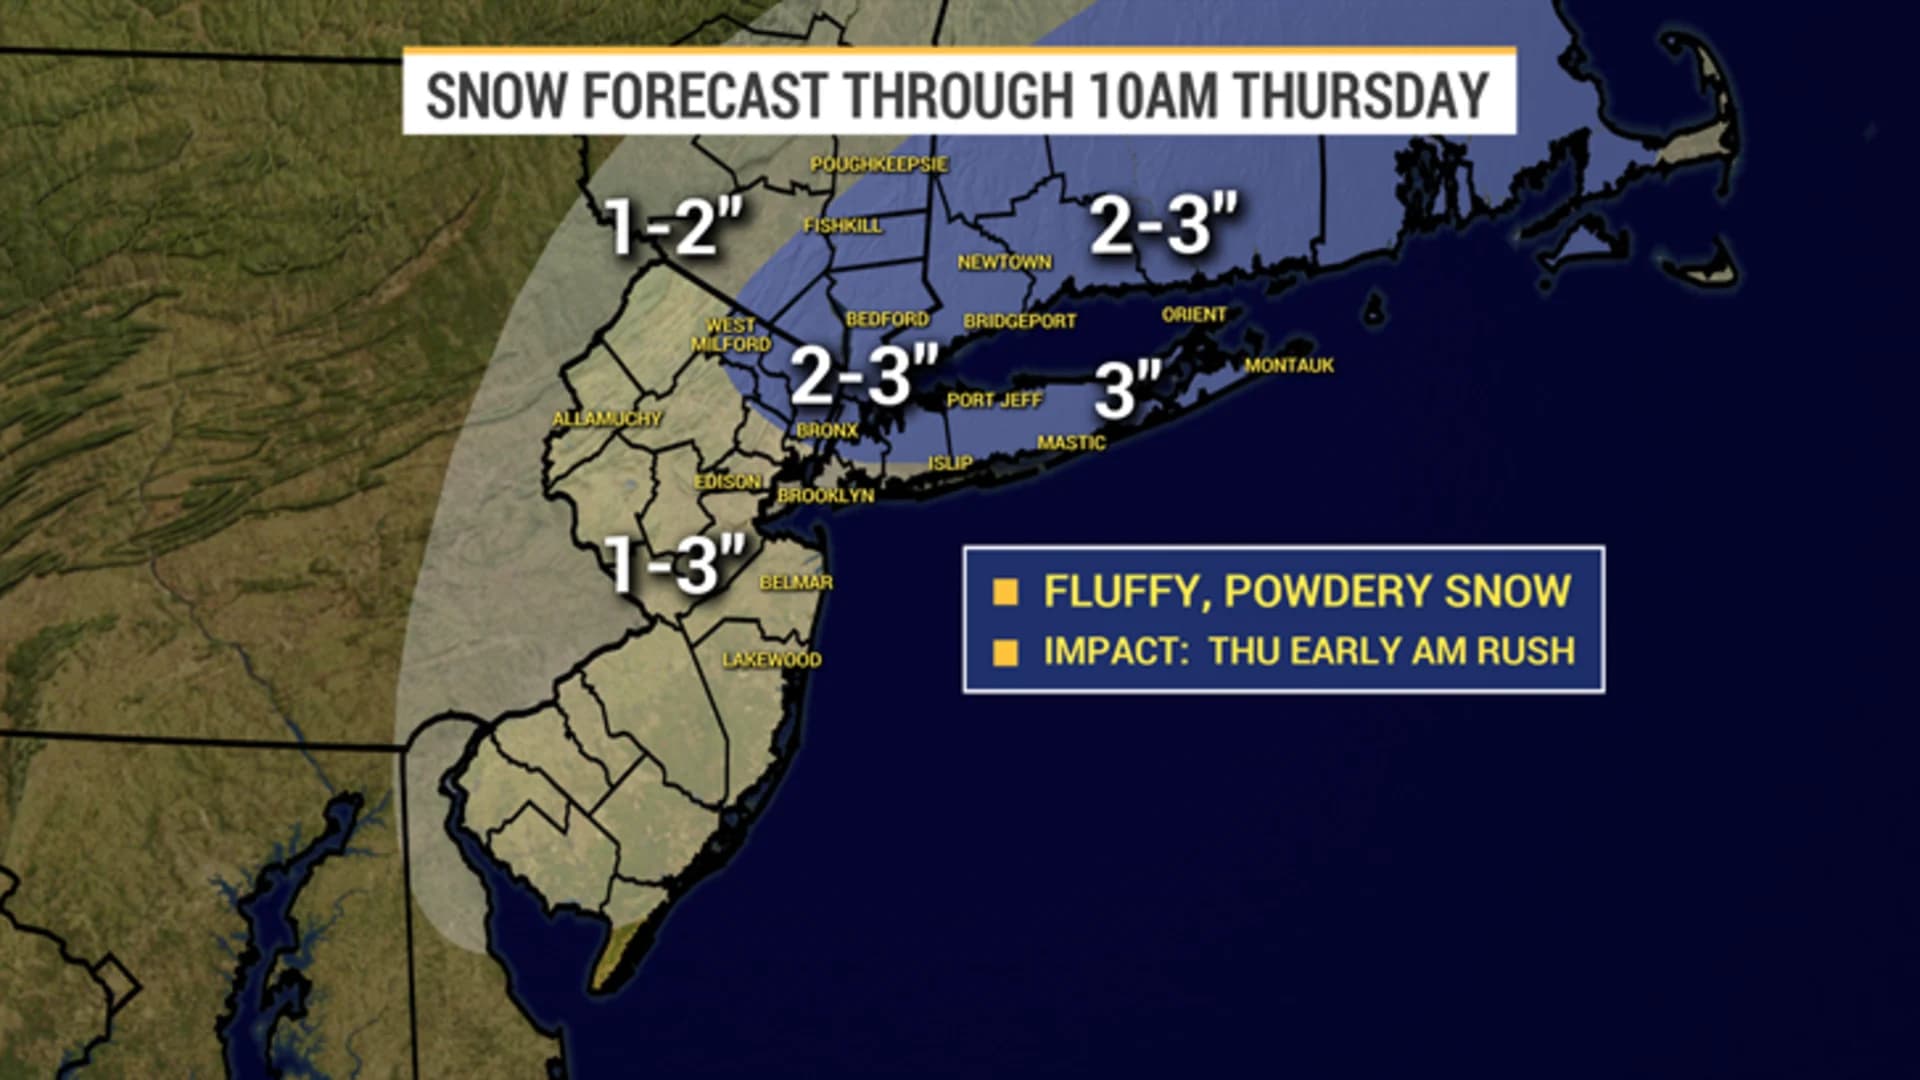 Winter weather advisory issued for NYC